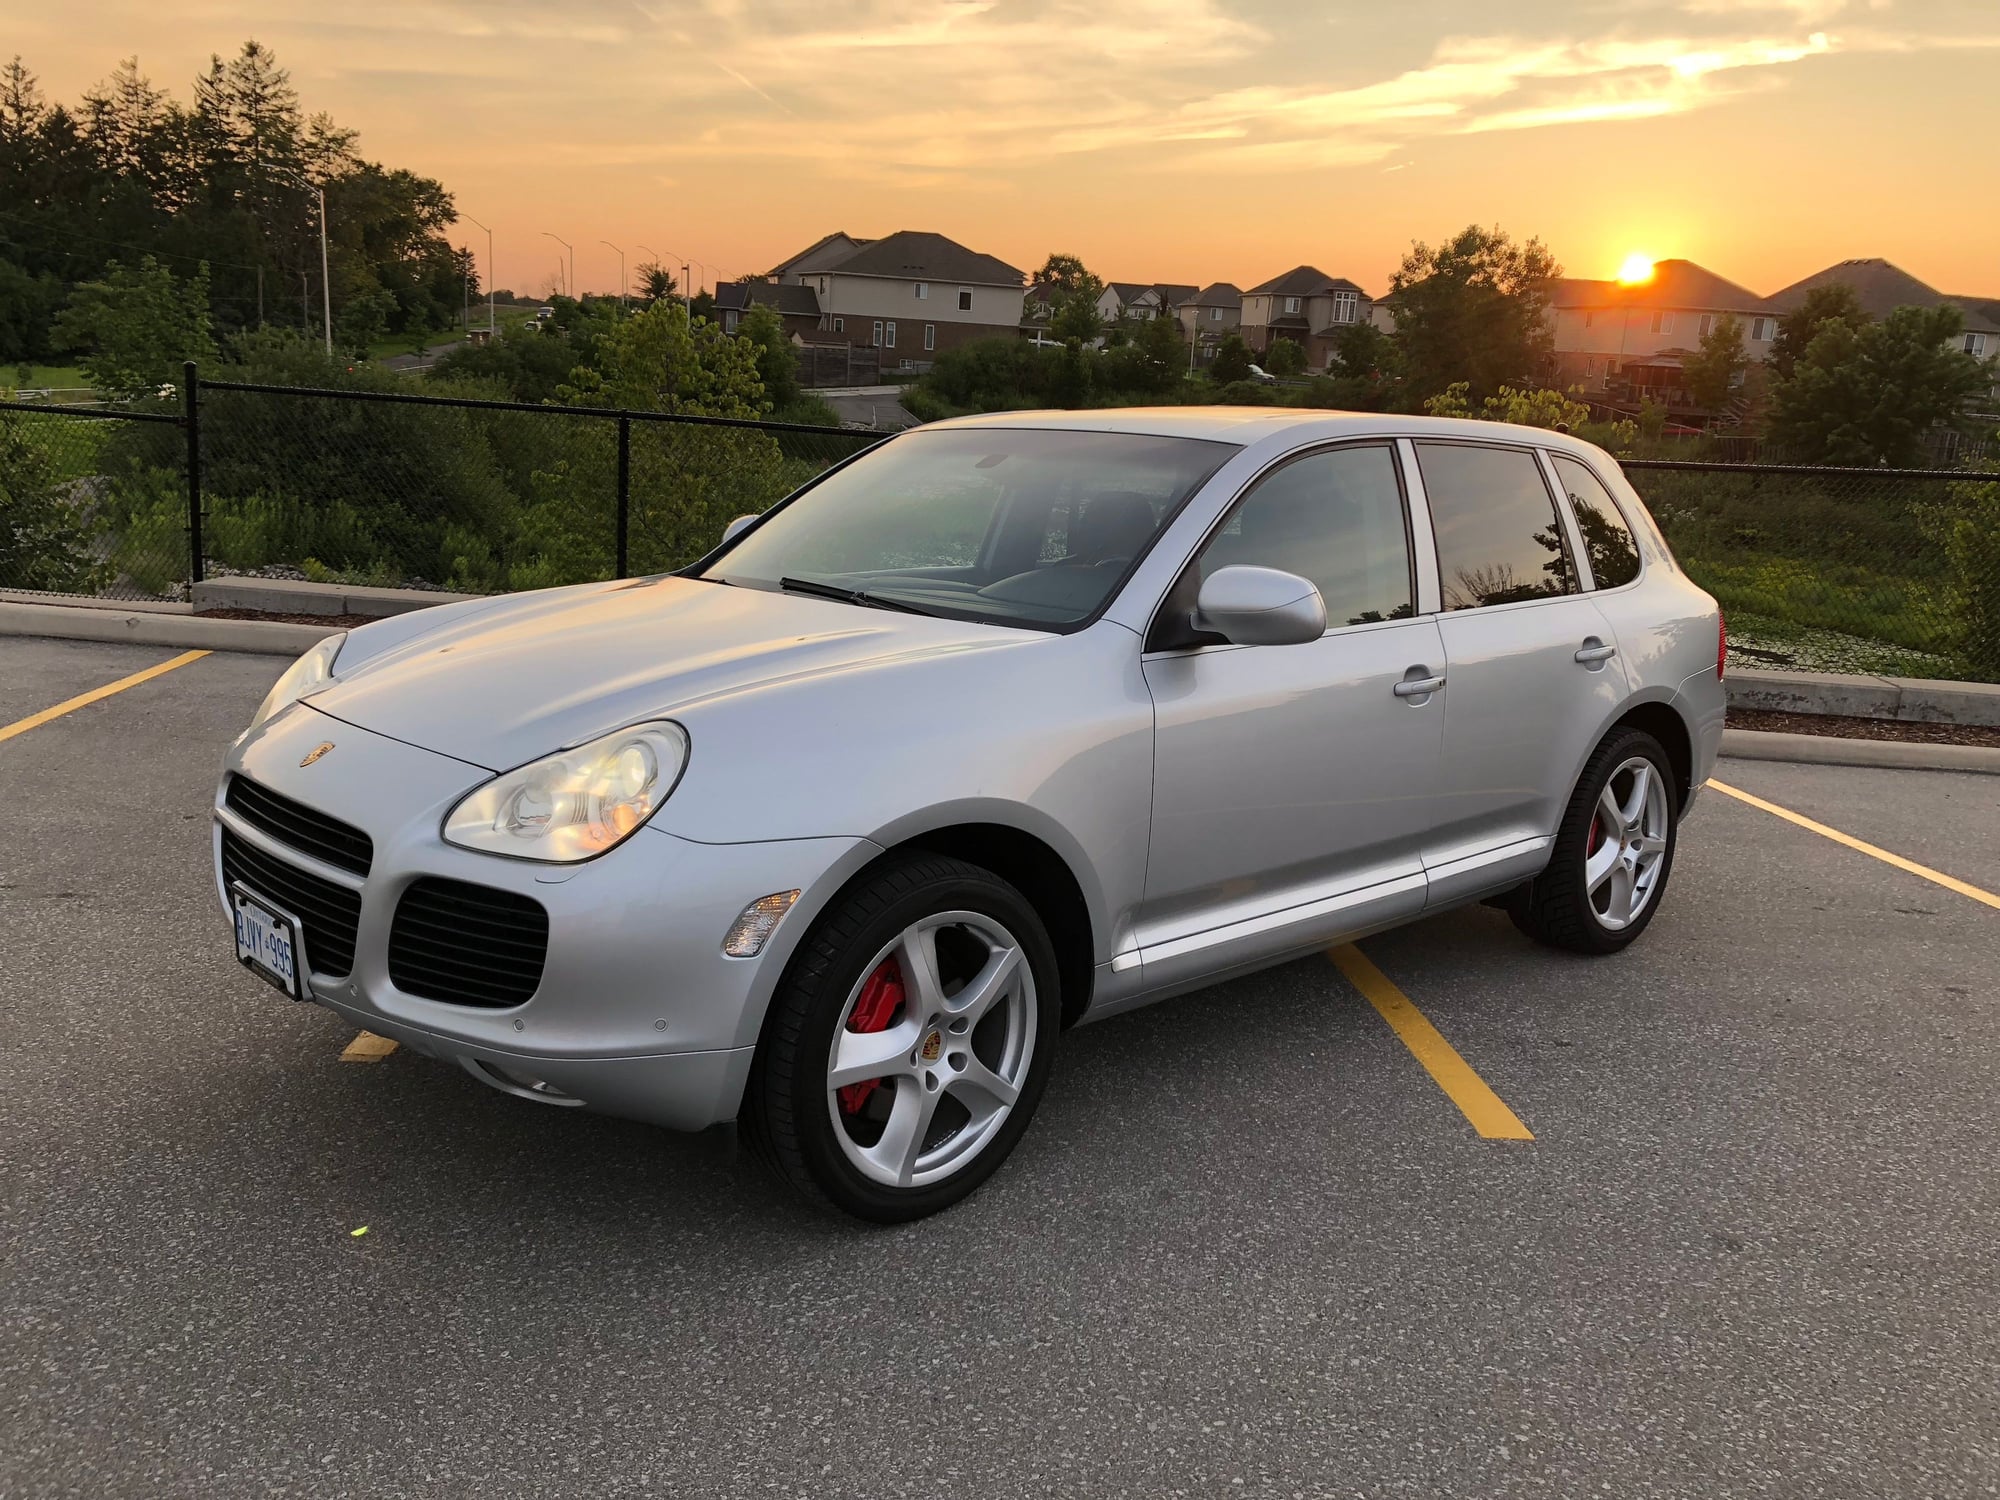 2004 Porsche Cayenne - 2004 Porsche Cayenne Turbo - Prev. Owned by Jerry Seinfeld - Used - VIN WP1AC29PX4LA90834 - 74,800 Miles - 8 cyl - AWD - Automatic - SUV - Silver - London, ON N6K4J5, Canada